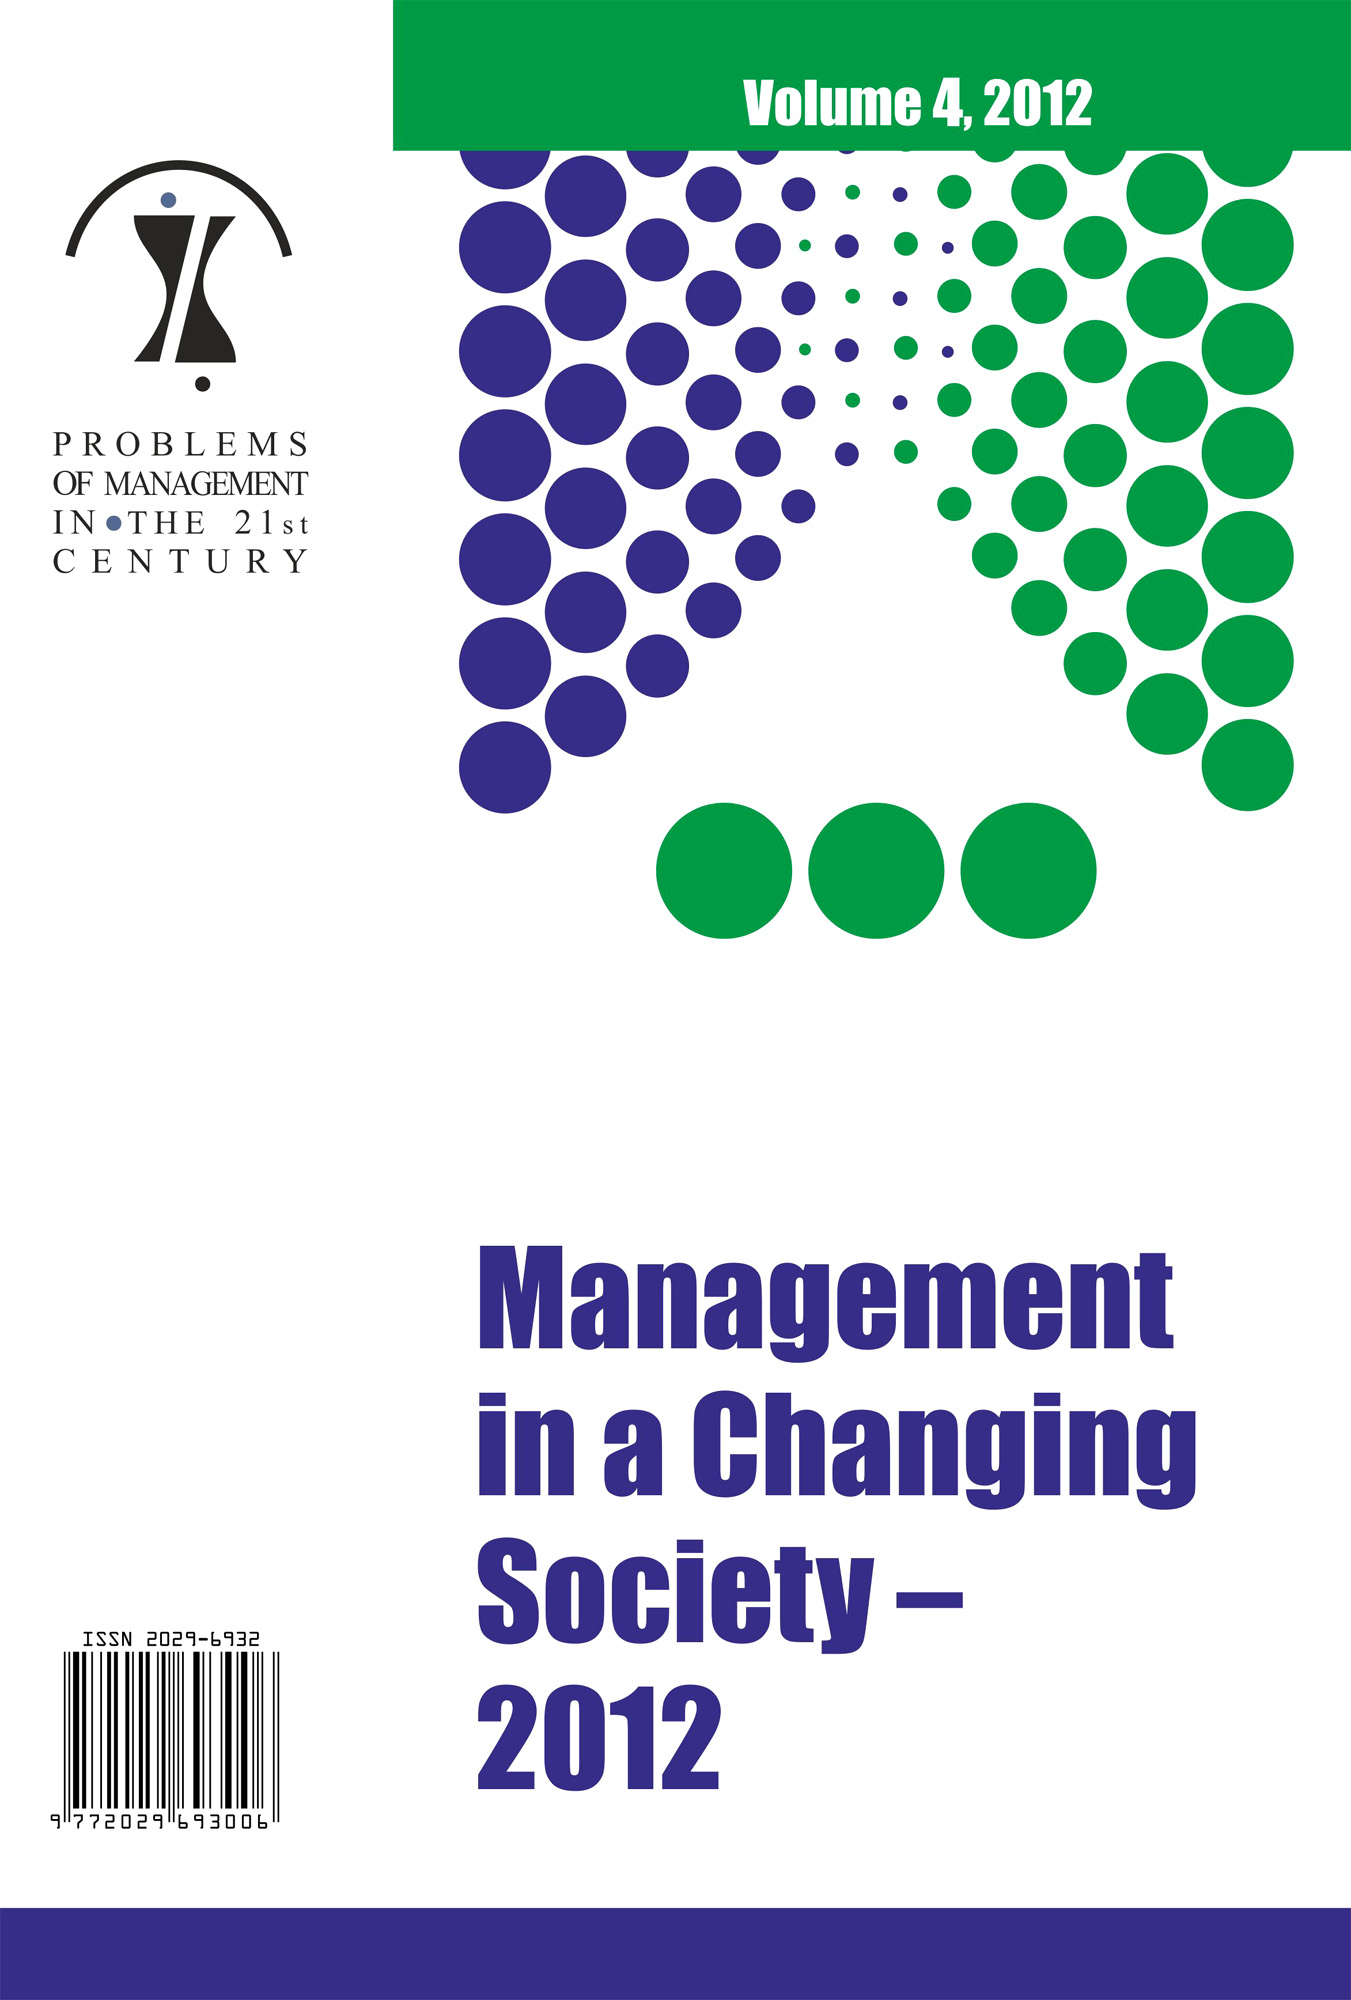 NON-FORMAL MANAGEMENT EDUCATION: SOME EVIDENCE FROM MANAGEMENT TRAINING BUSINESSES WEBSITES IN ESTONIA Cover Image